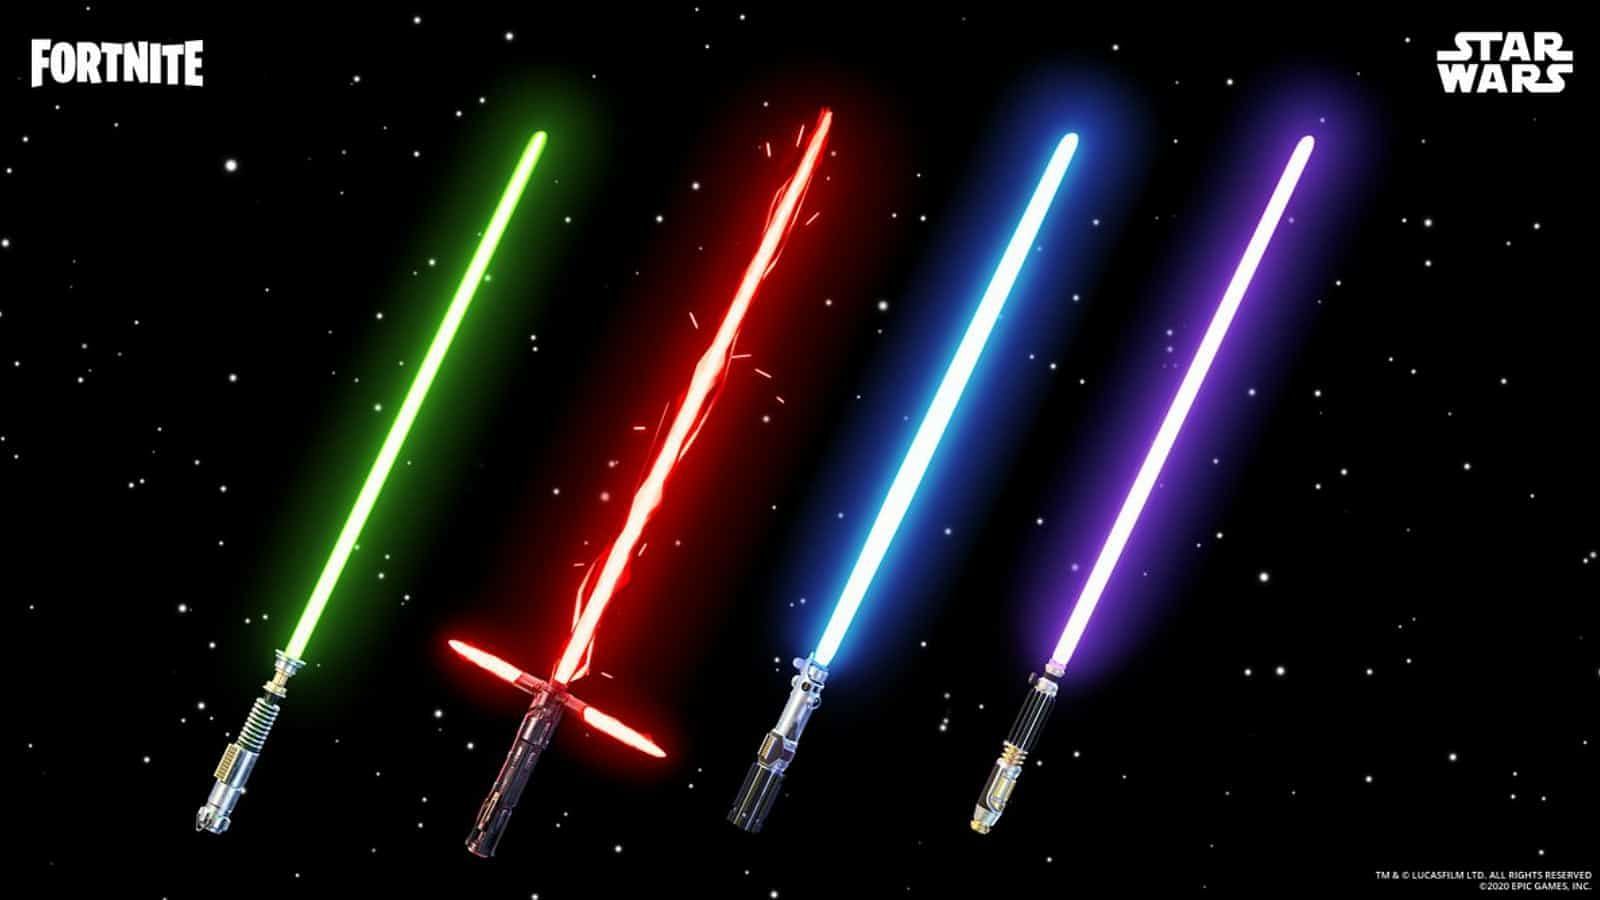 Lightsabers may also return to Fortnite (Image via Epic Games)